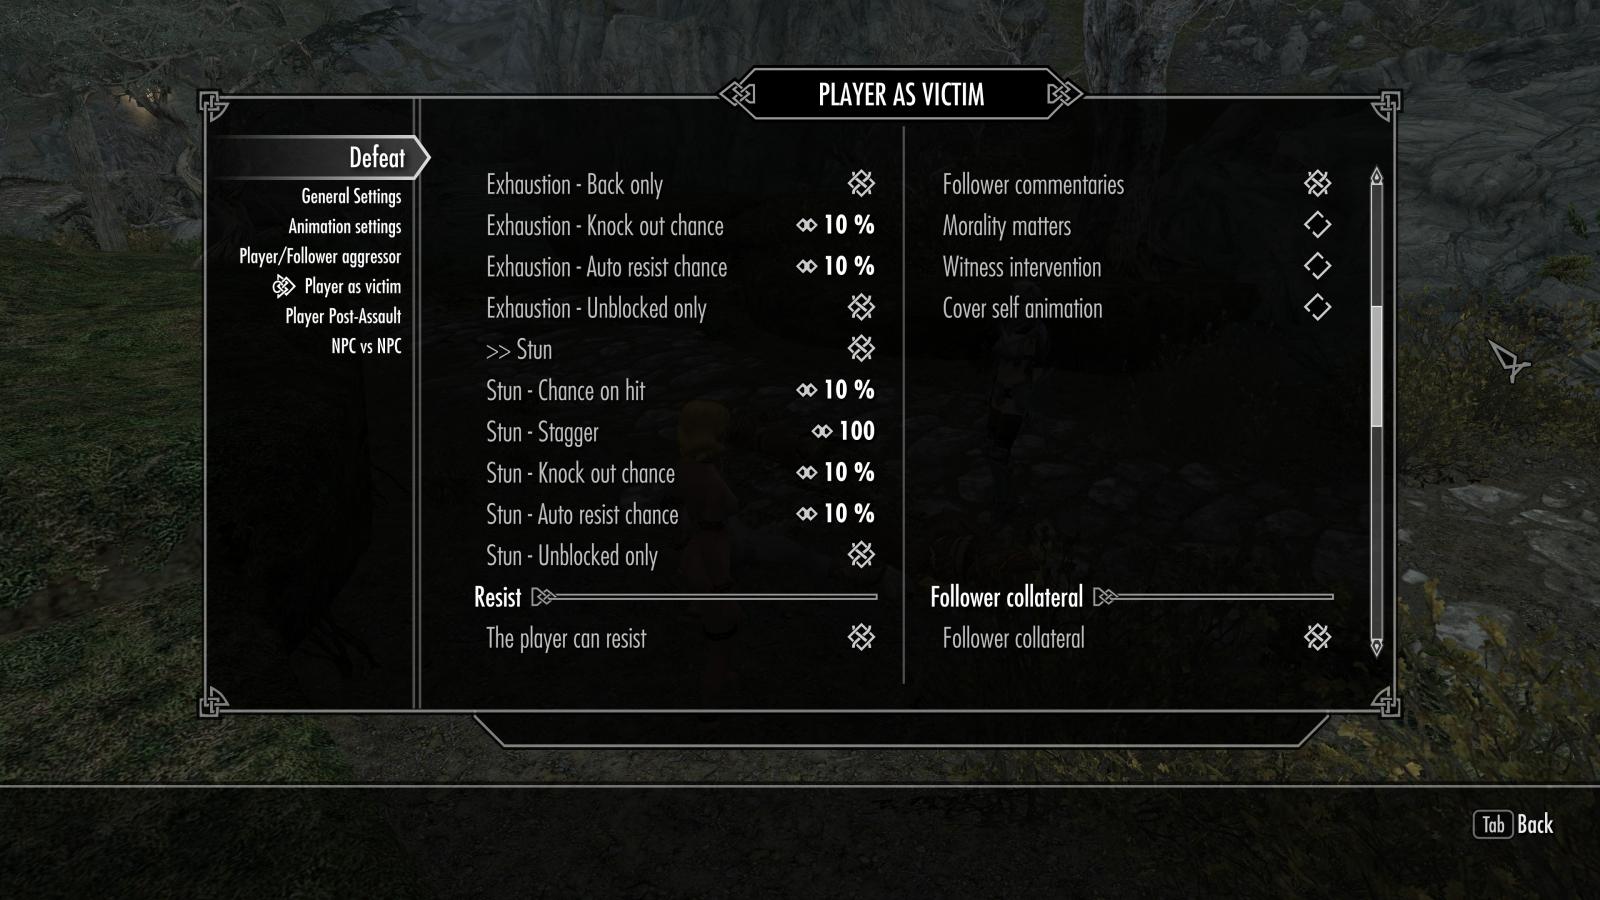 Set you player as victim settings to these in defeat. 